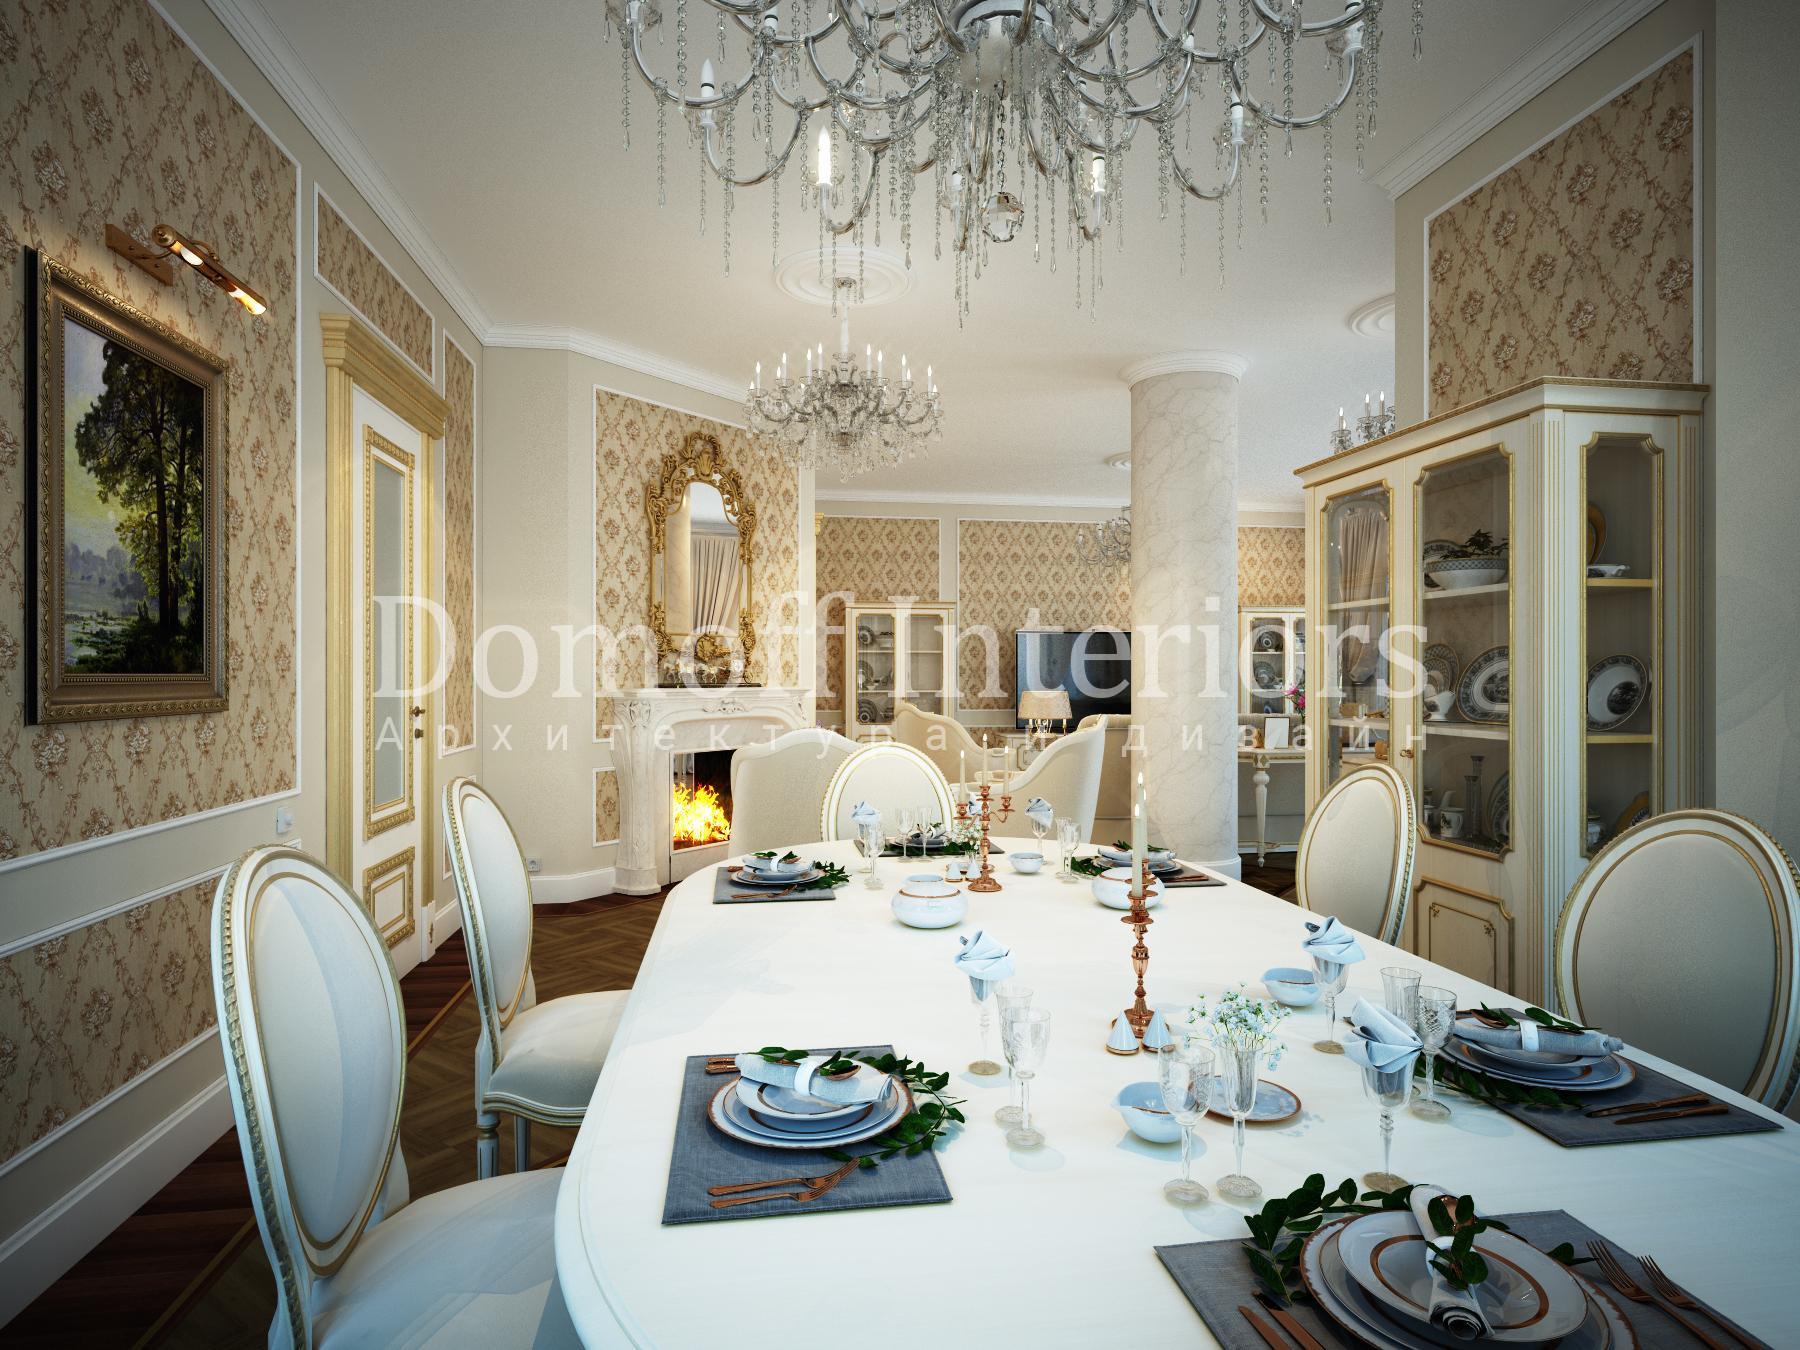 Living&dining room made in the style of Classics